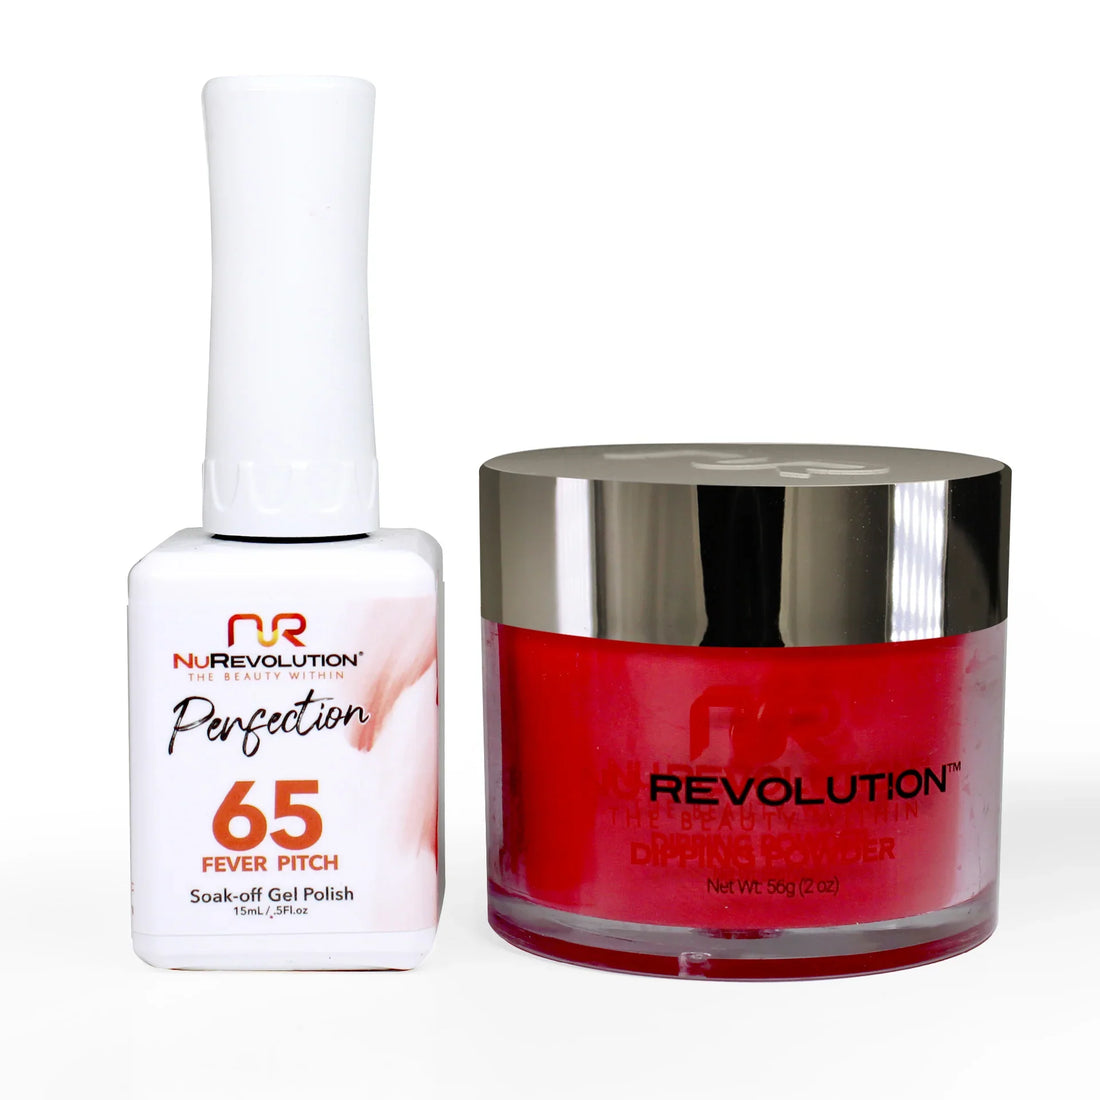 NuRevolution Perfection 065 Fever Pitch